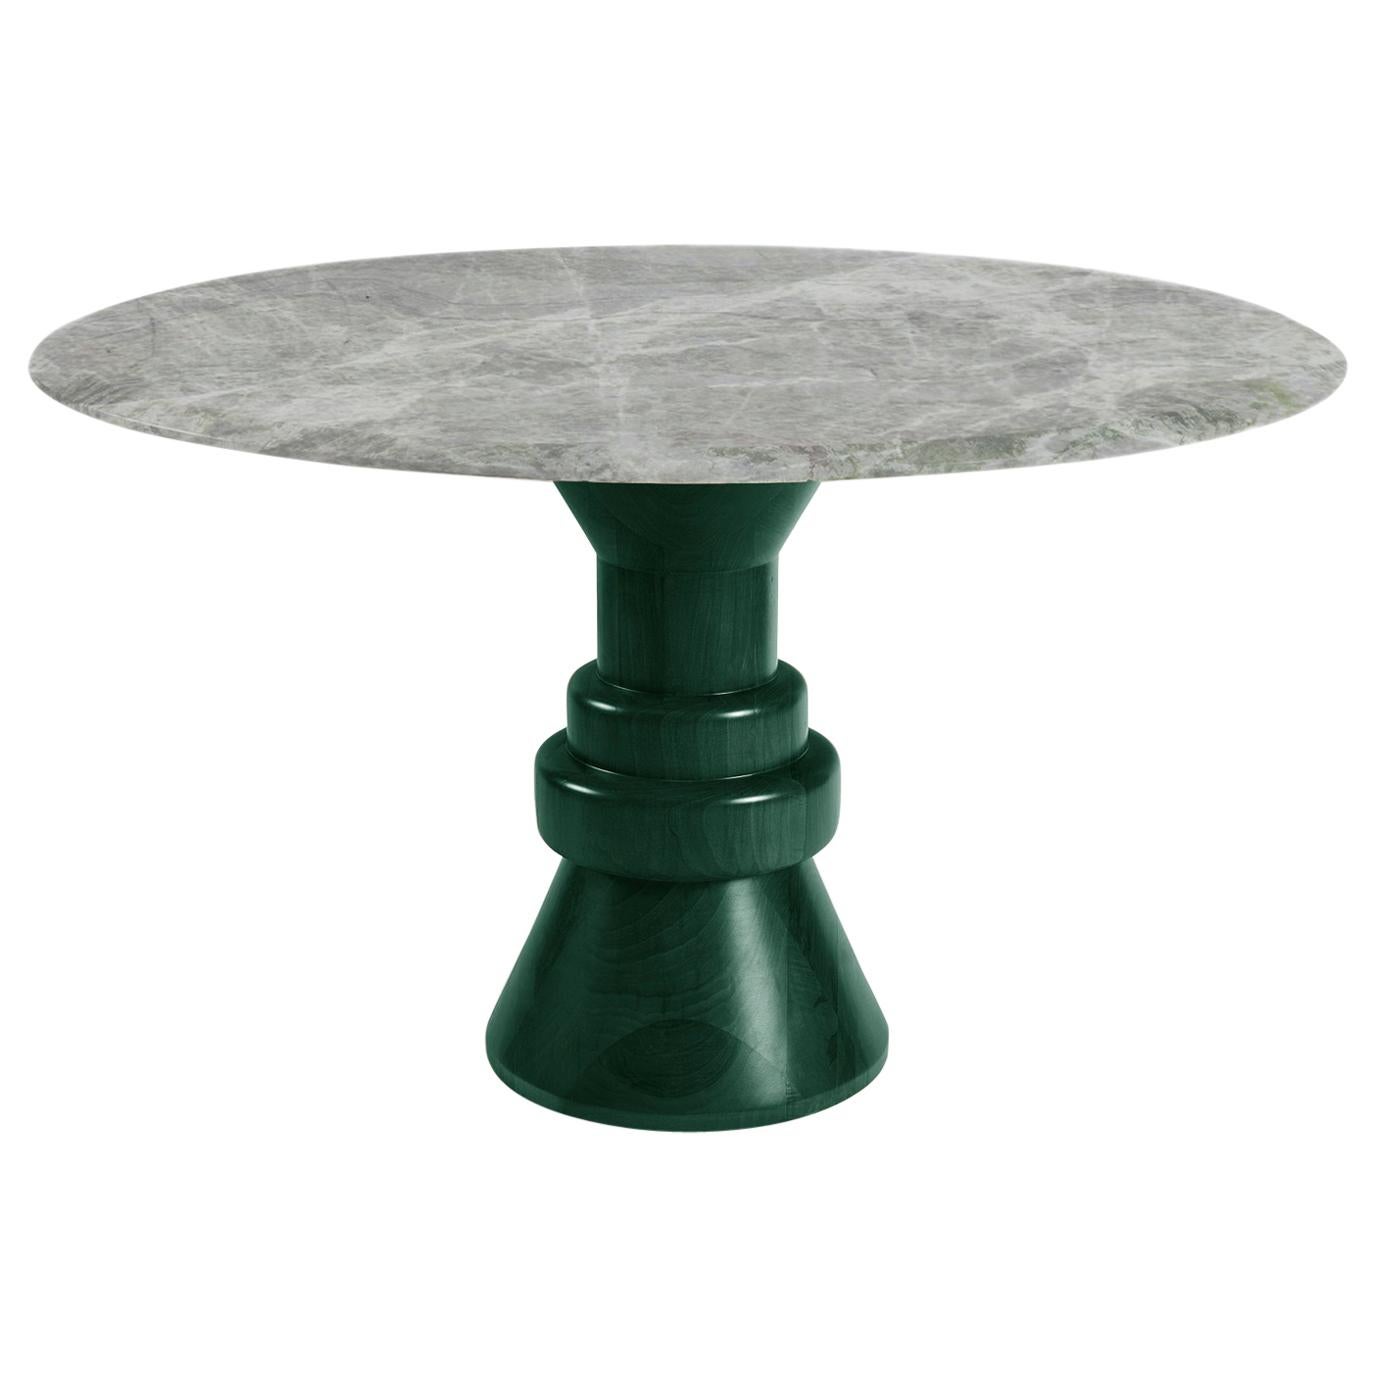 21st Century Gray Marble Round Dining Table with Sculptural Black Wooden Base